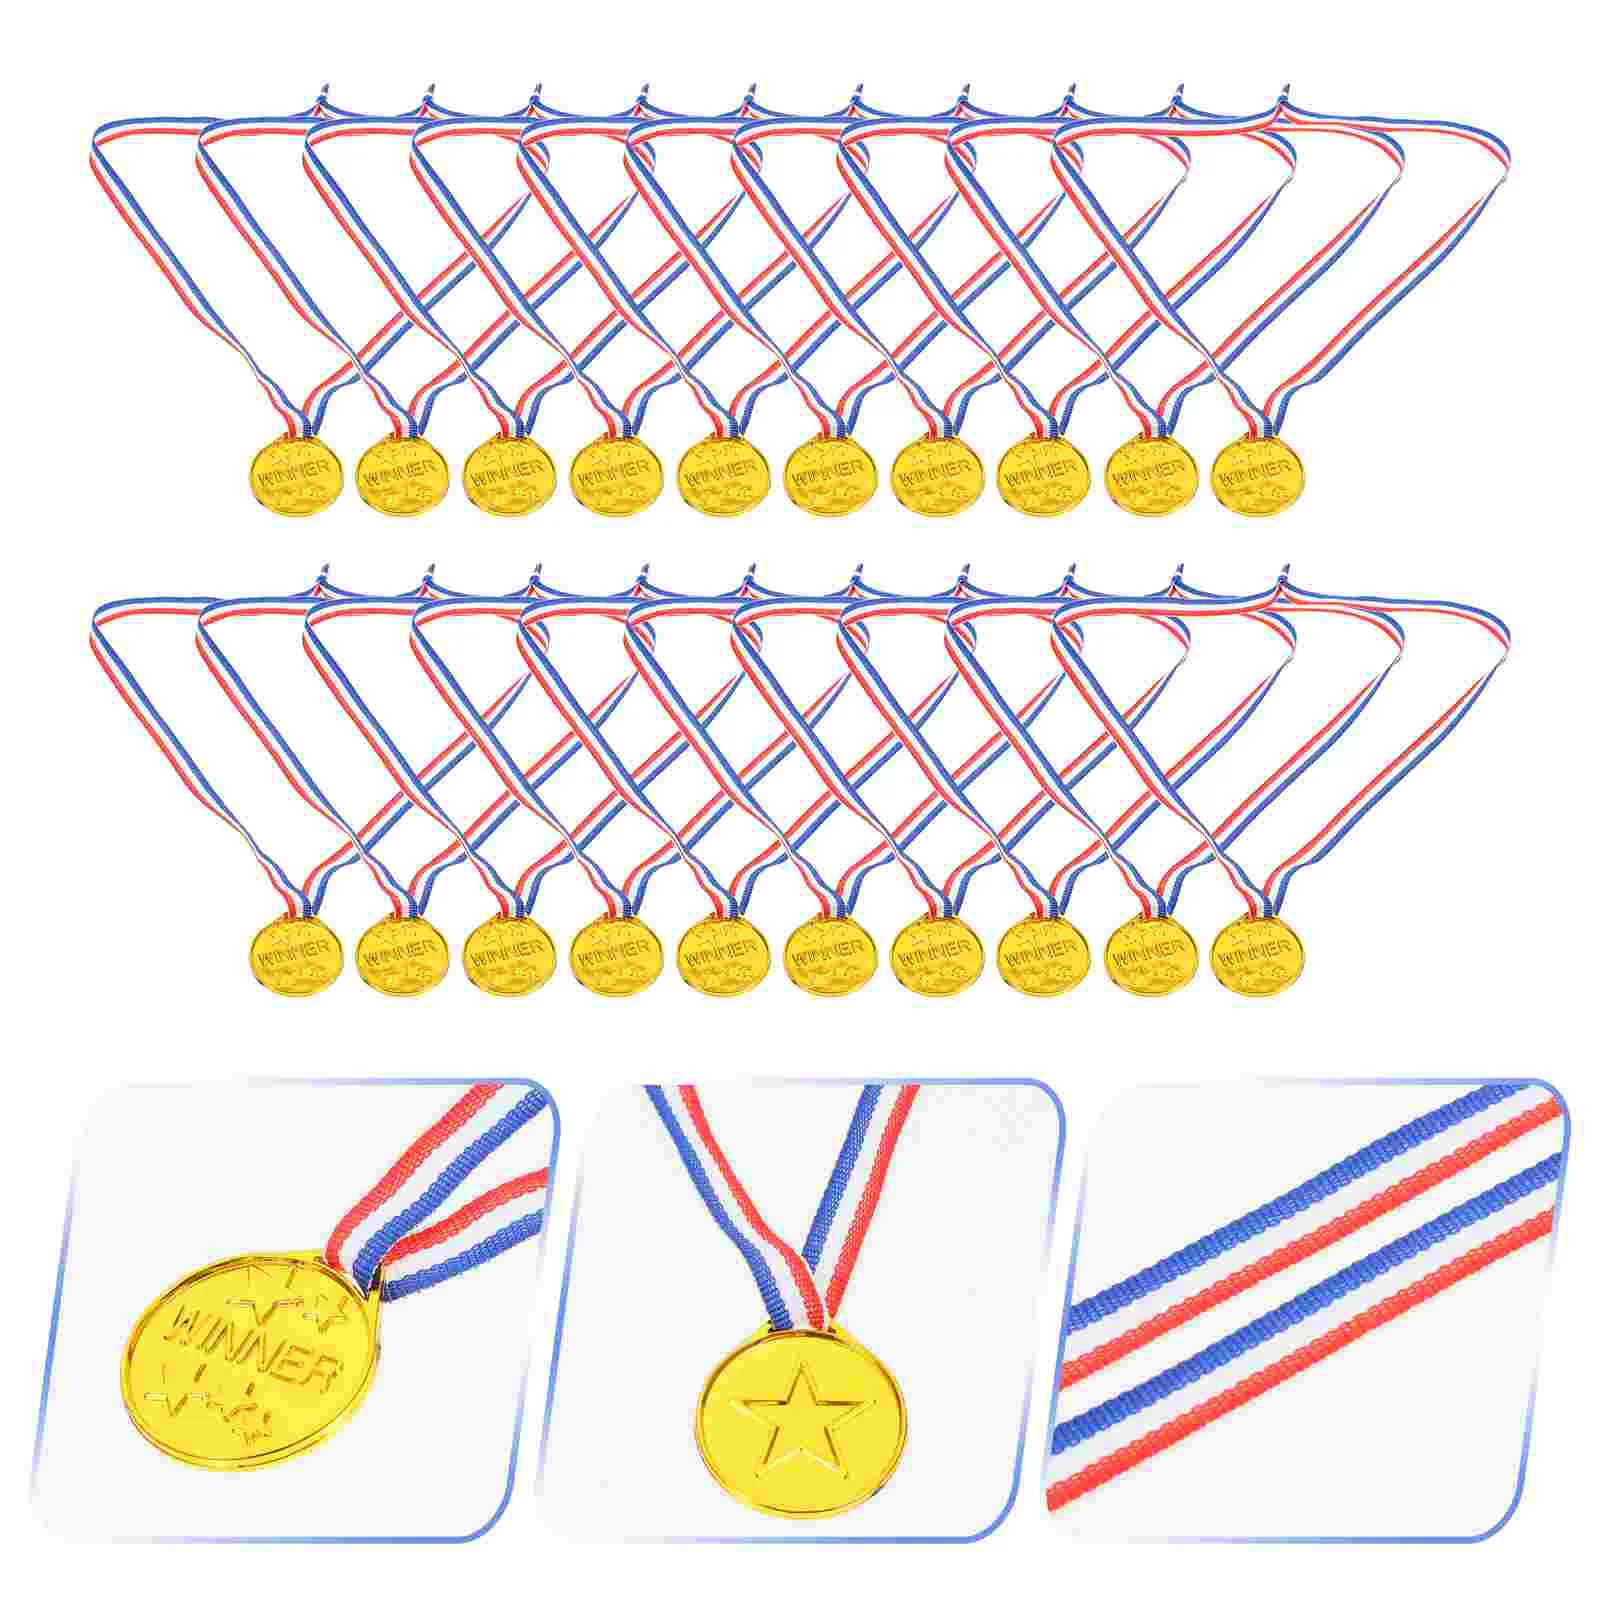 

20 Pcs Gift Ribbon Children's Medal Toys Kids Award Medals Competition Hanging Party Gifts Plastic Favors Soccer trophies